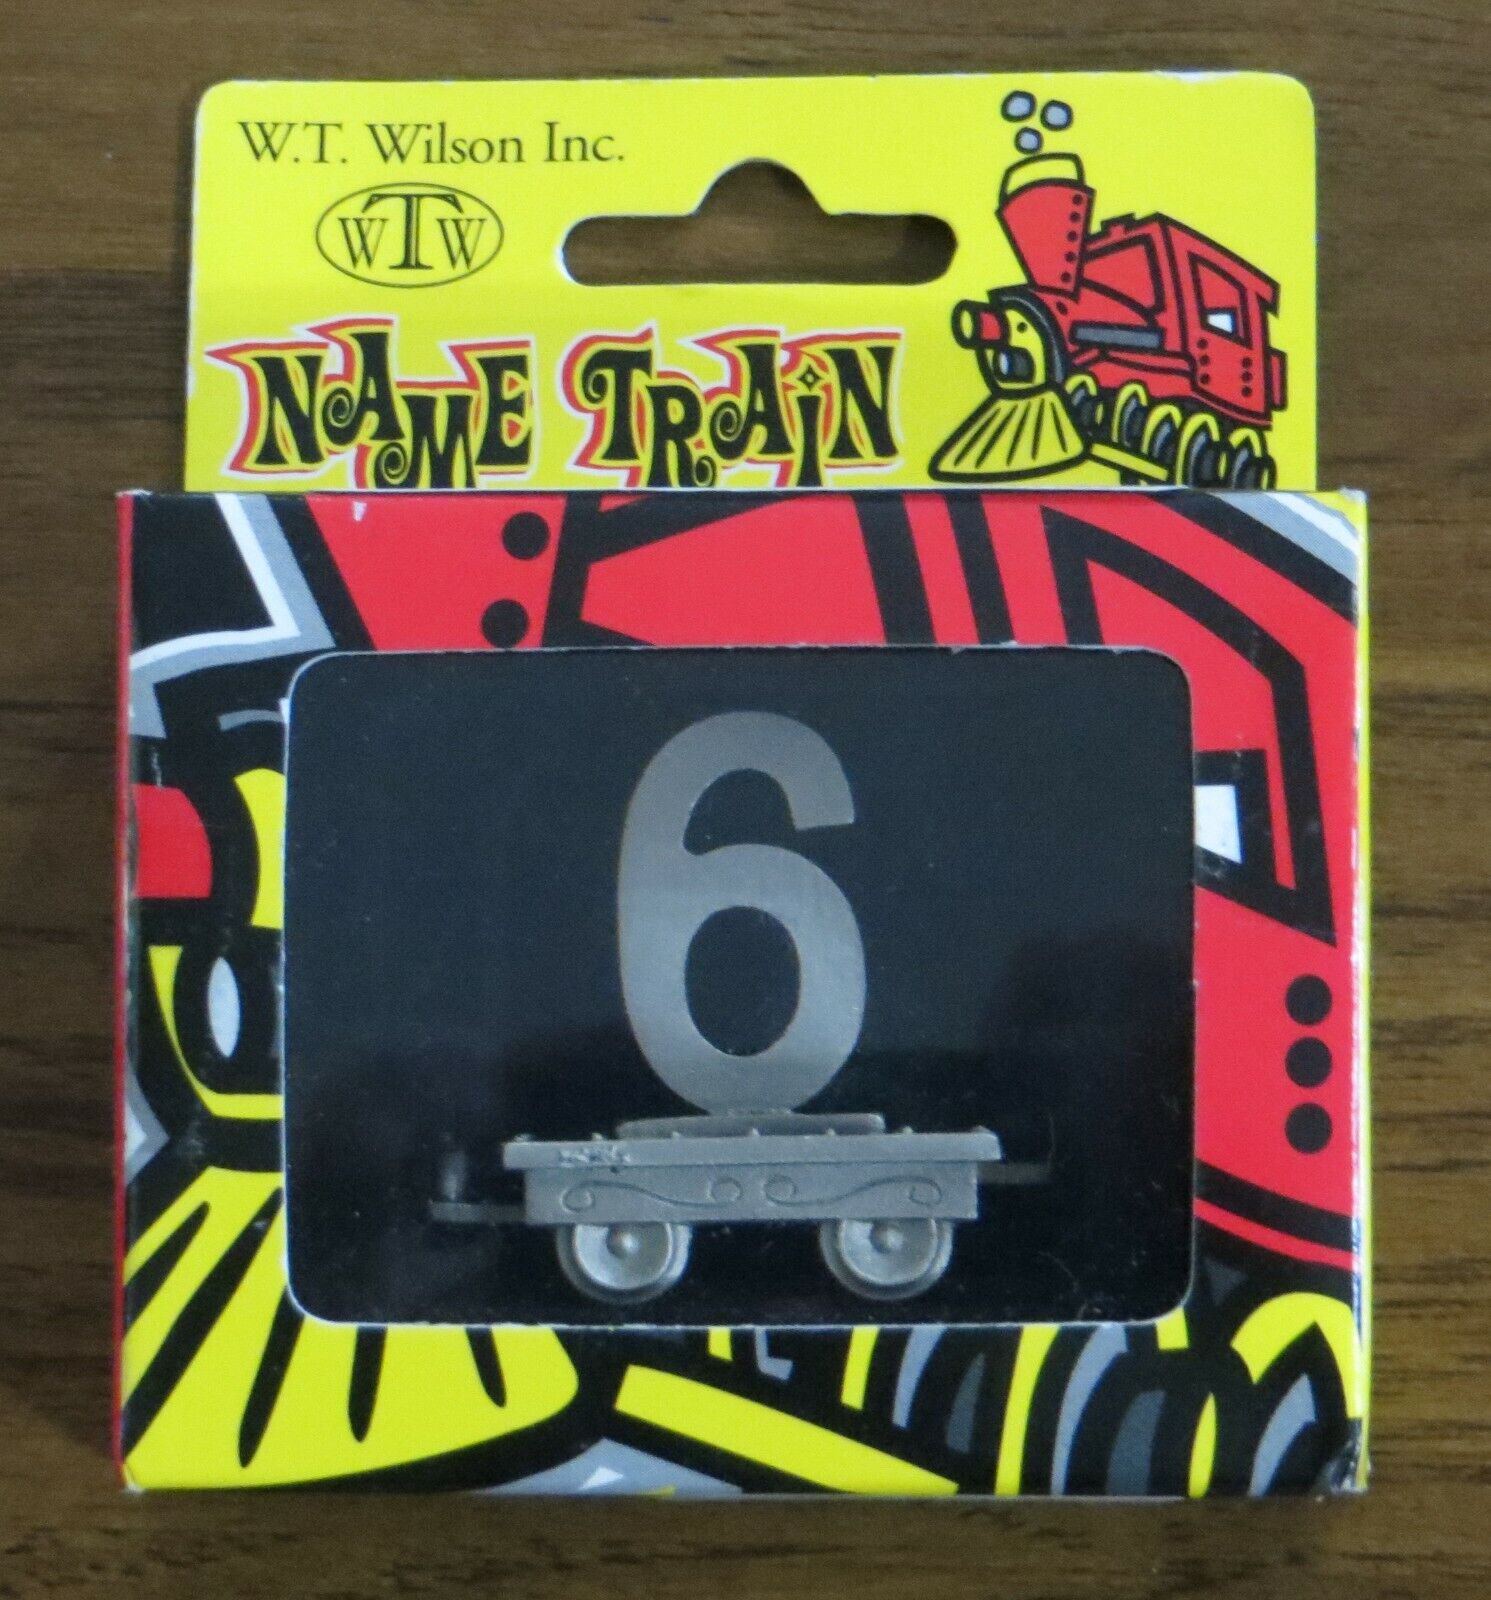 WT Wilson (WTW) Lead Free Pewter Name Train Number 6 - Made in USA - NEW in Box